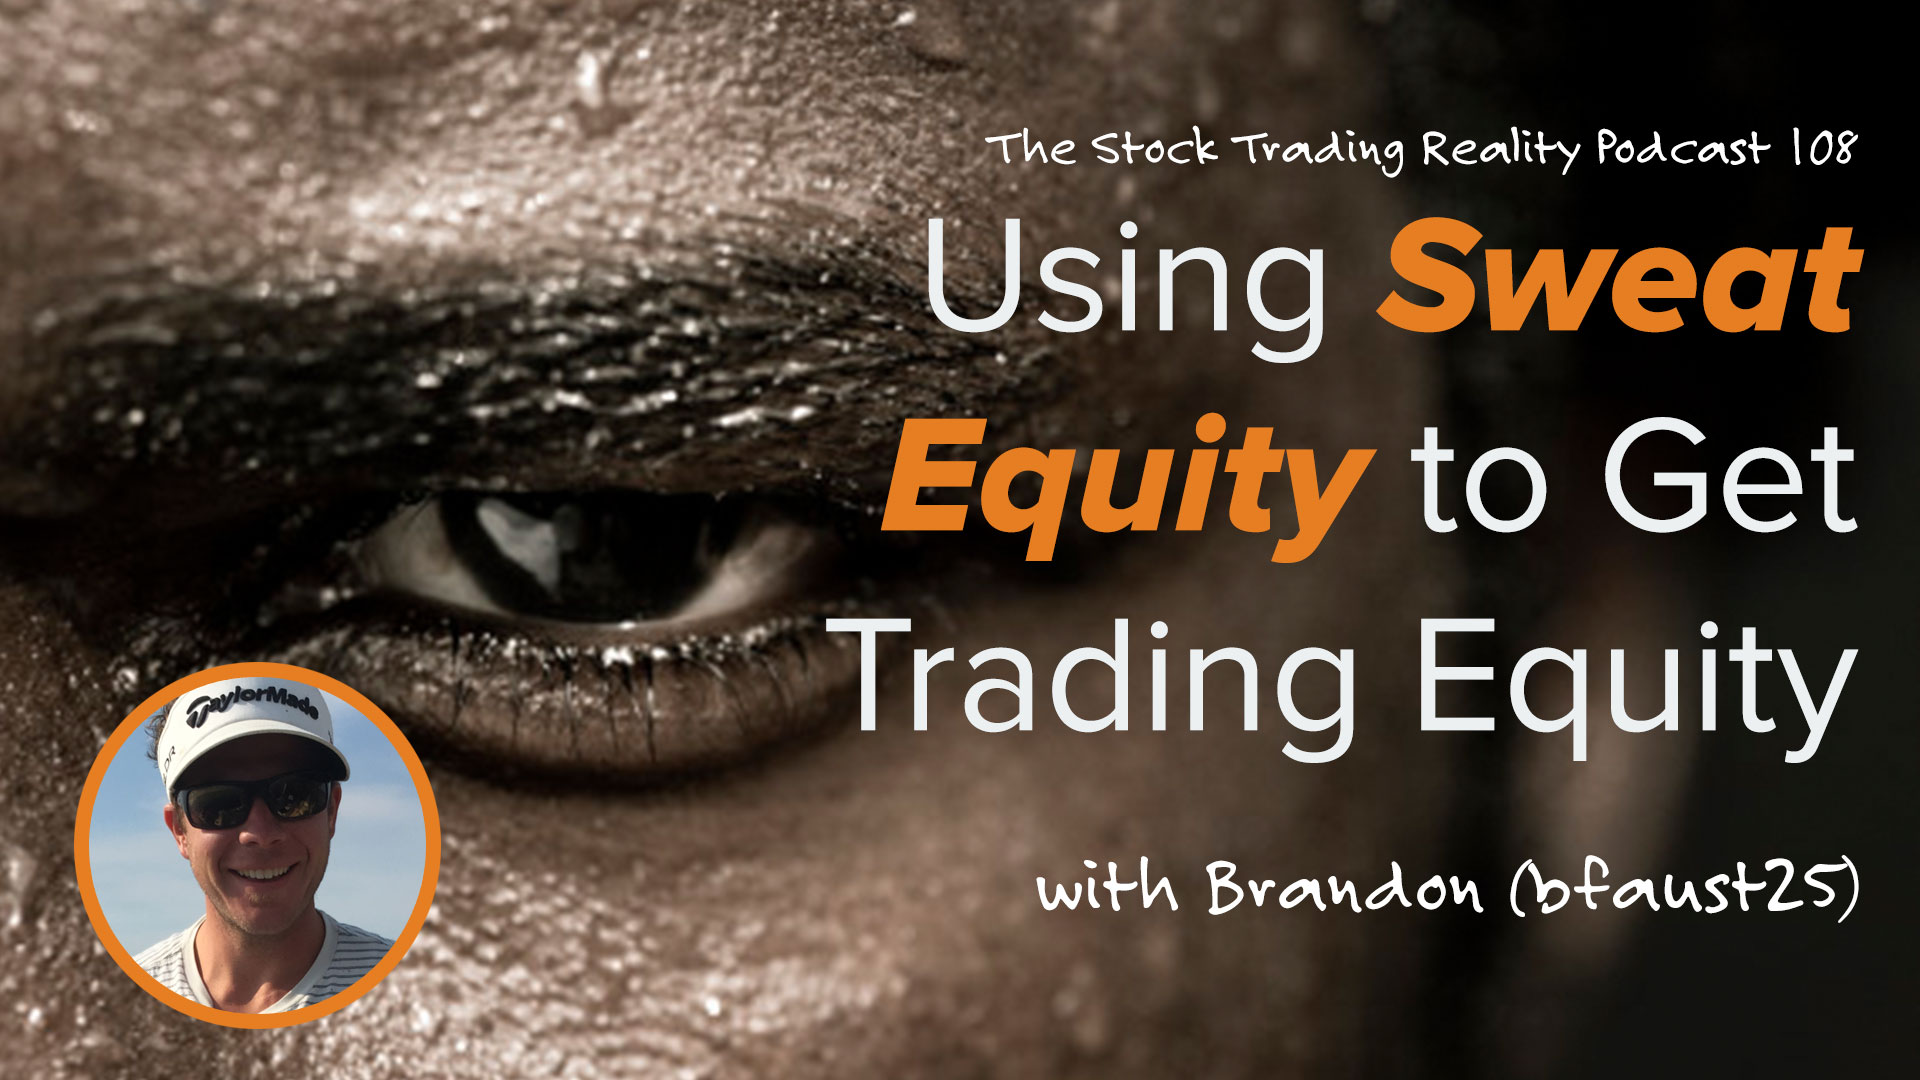  Trading Sales for Sweat Equity in TN